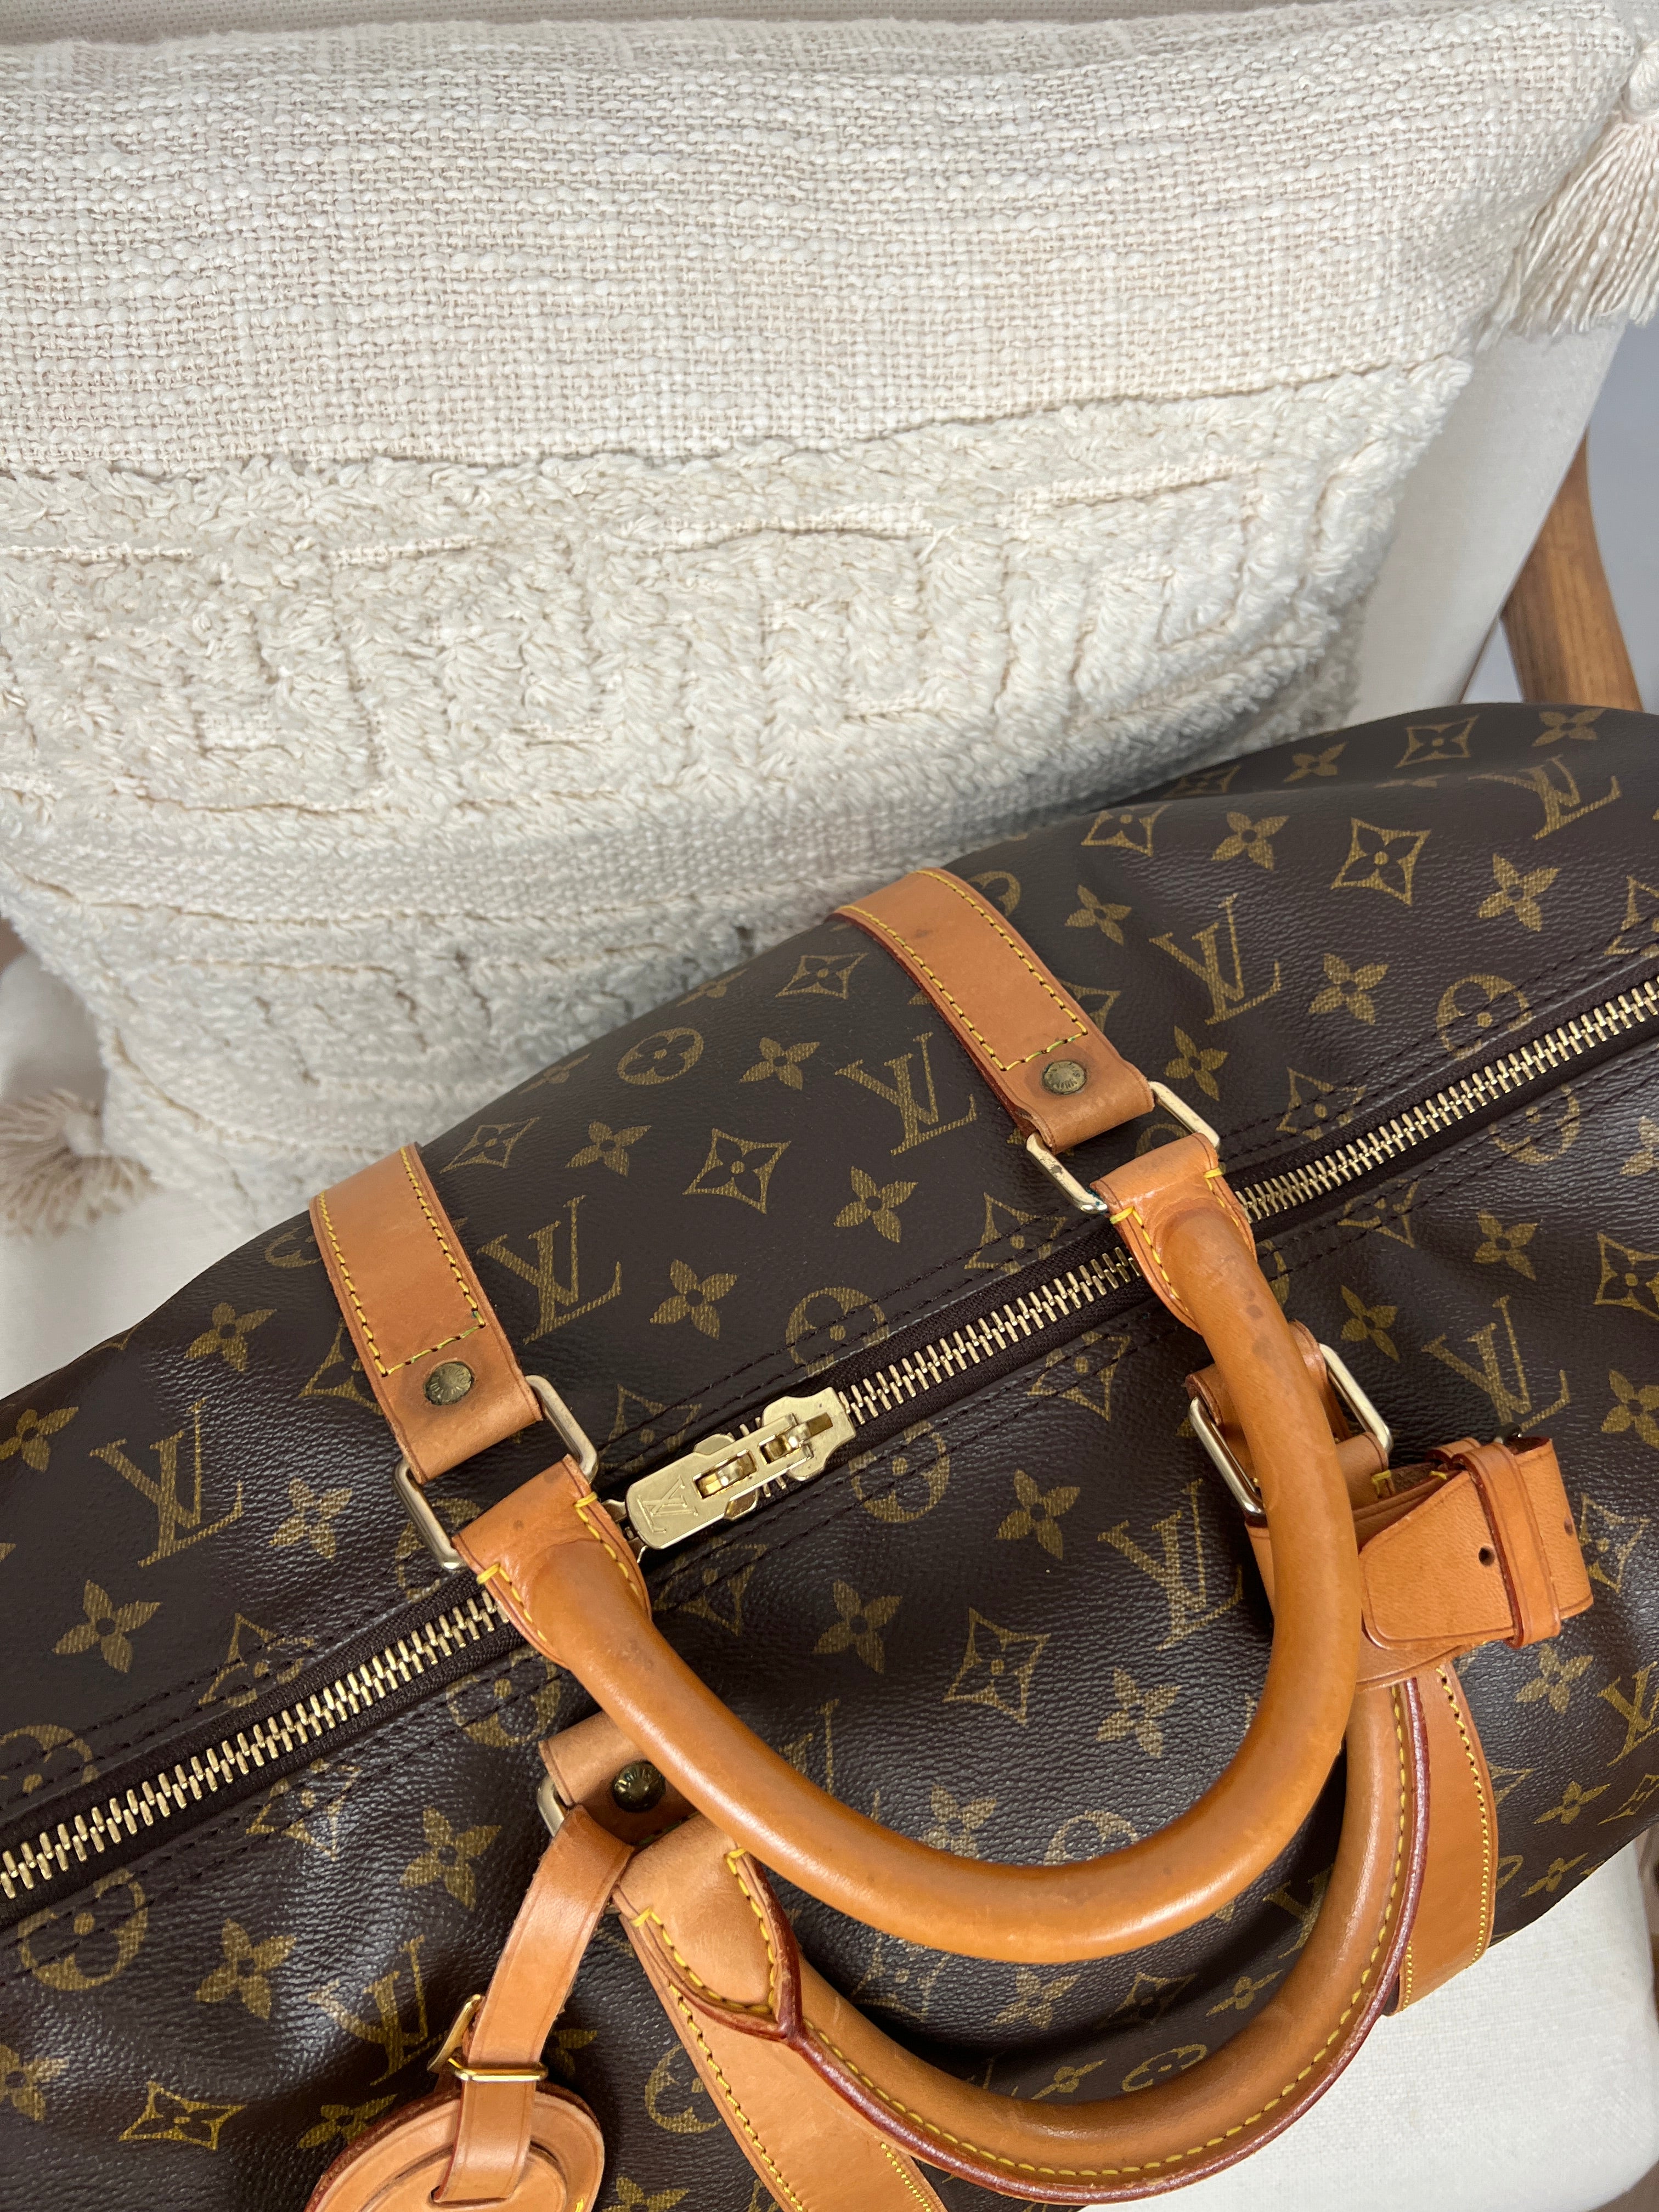 LOUIS VUITTON Bag model Keepall in monogrammed canva…